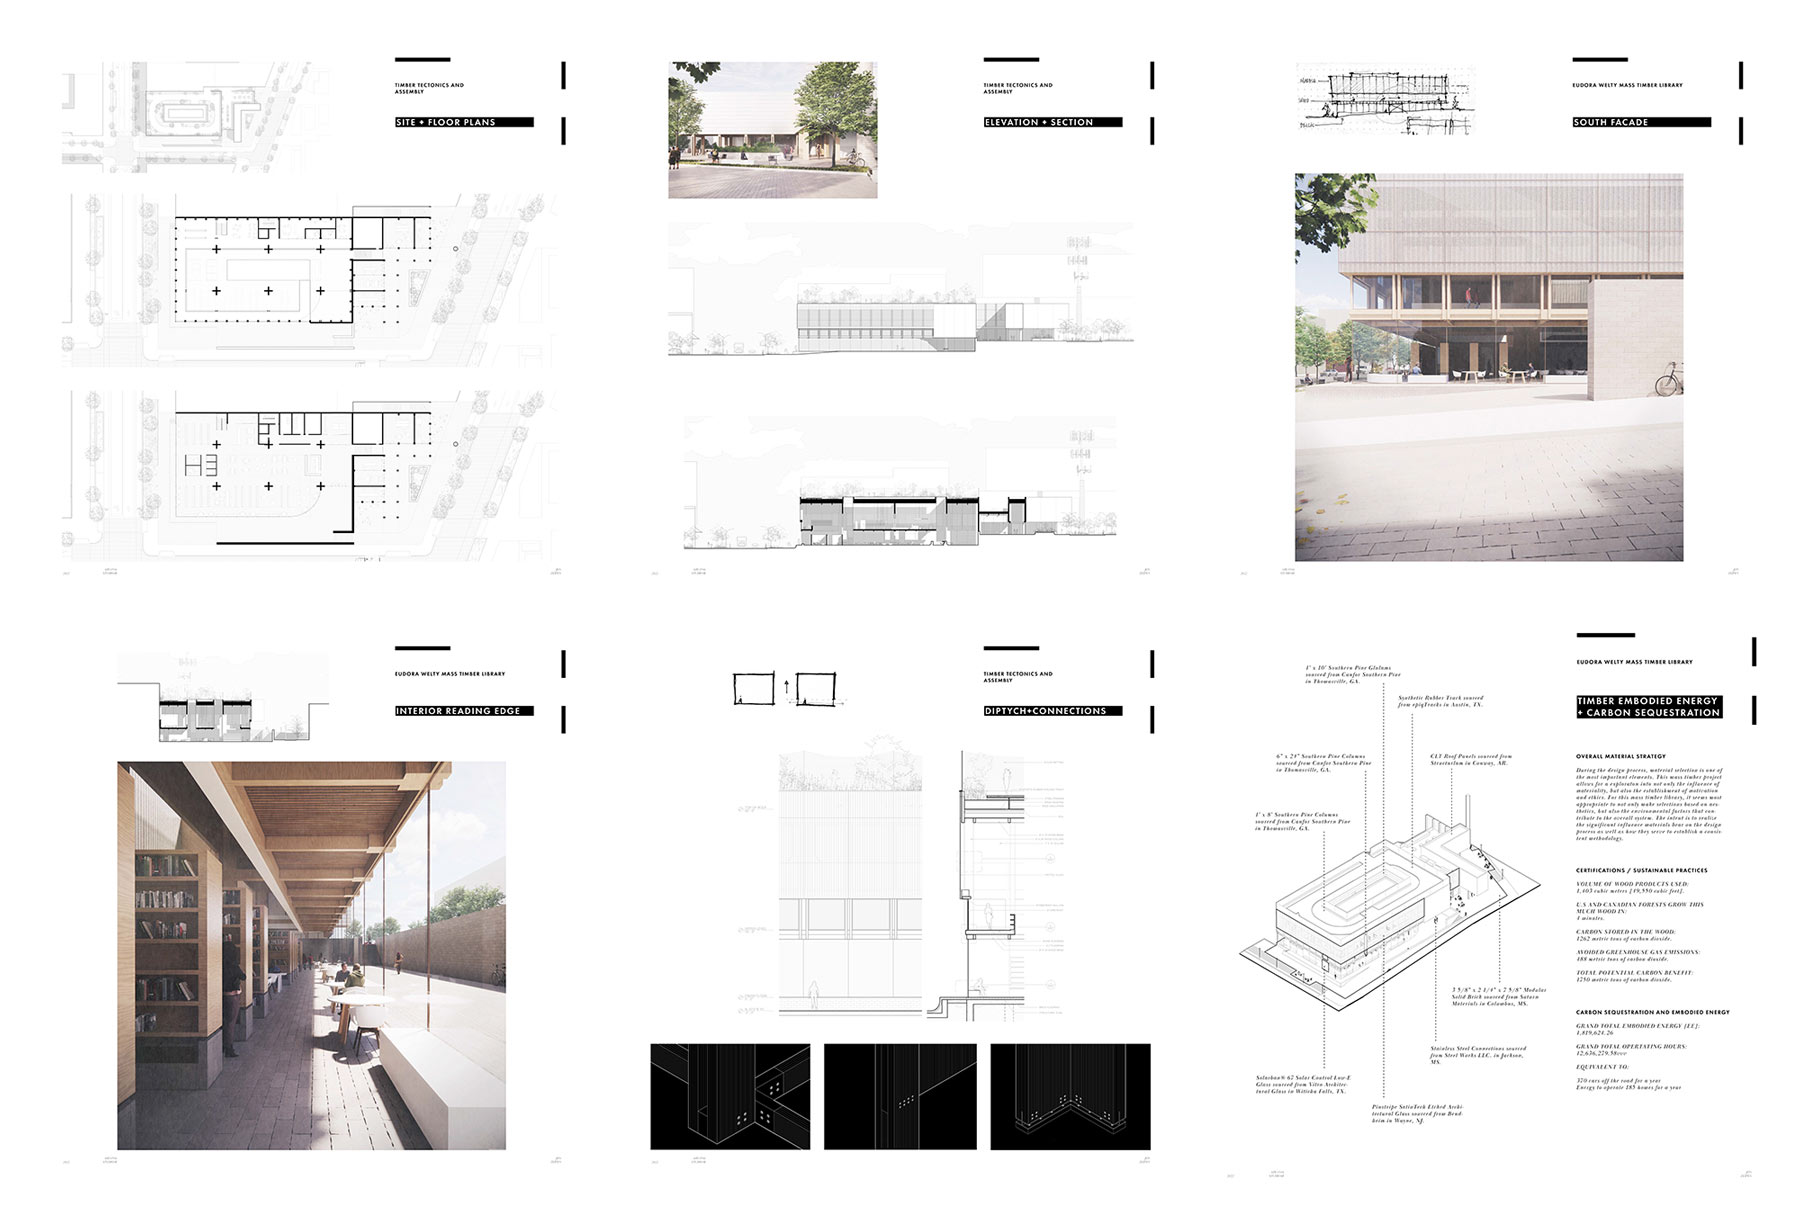 A collage of six different photos. Most of them black and white blueprints of a building. Two of them are mock-reality photos. One shows the inside with lots of bookshelves, a wooden ceiling, and fully glass walls. The other mock-reality photo shows the outside. The building is surrounded by glass walls on the first two floors, then there is a light tan tint to the walls on the upper levels.